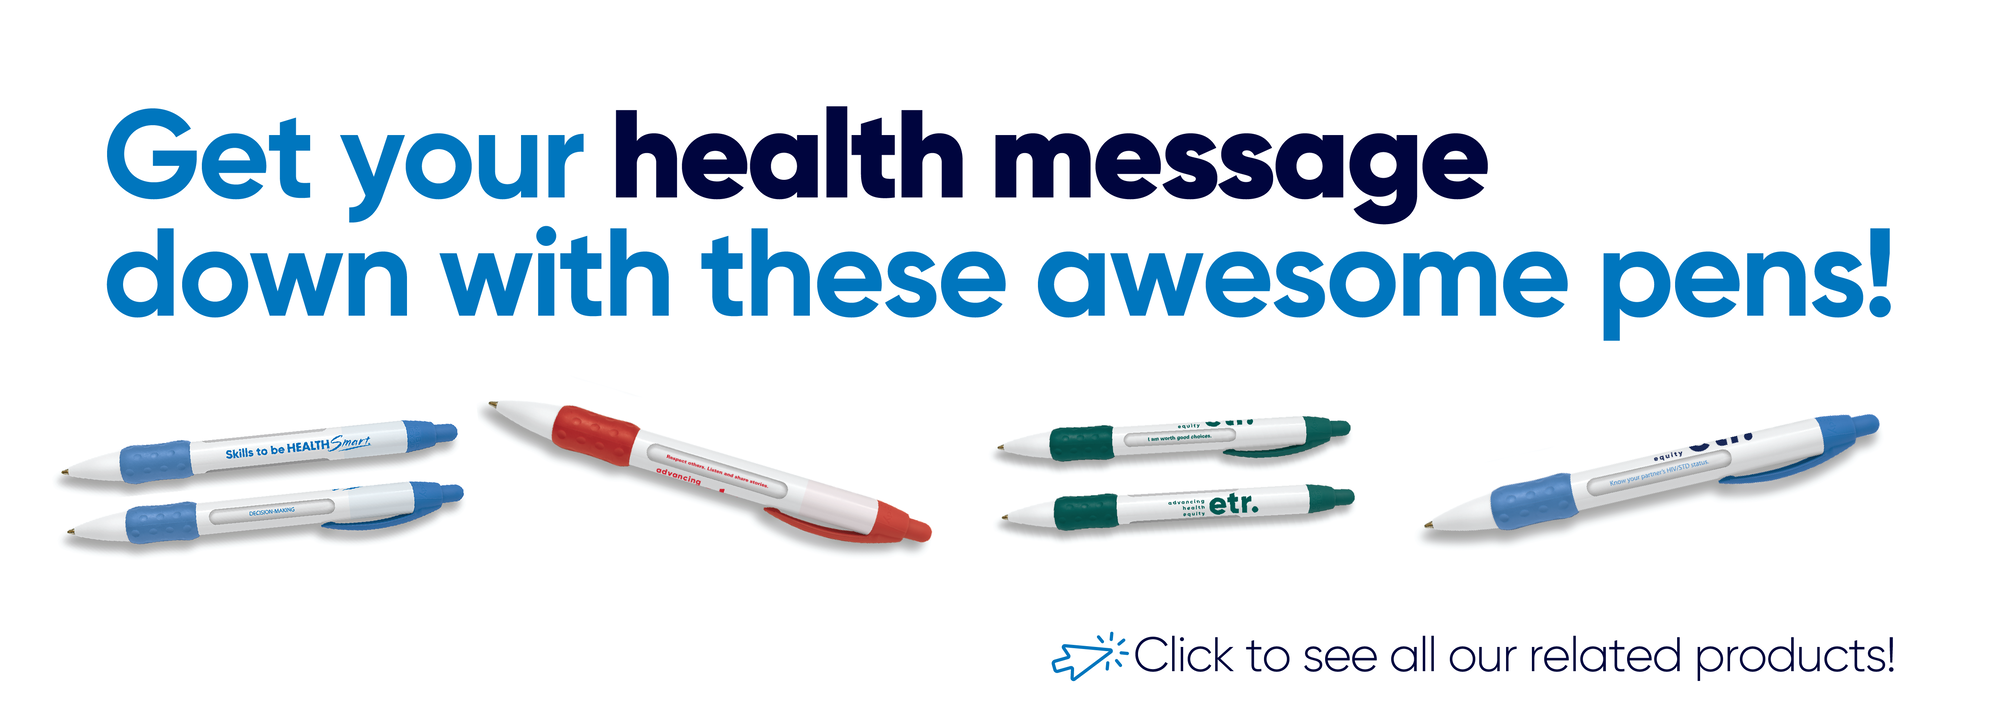 Get your health message down with these awesome pens! Various colors of pens with health related messages printed on them. Click to see all our related products!